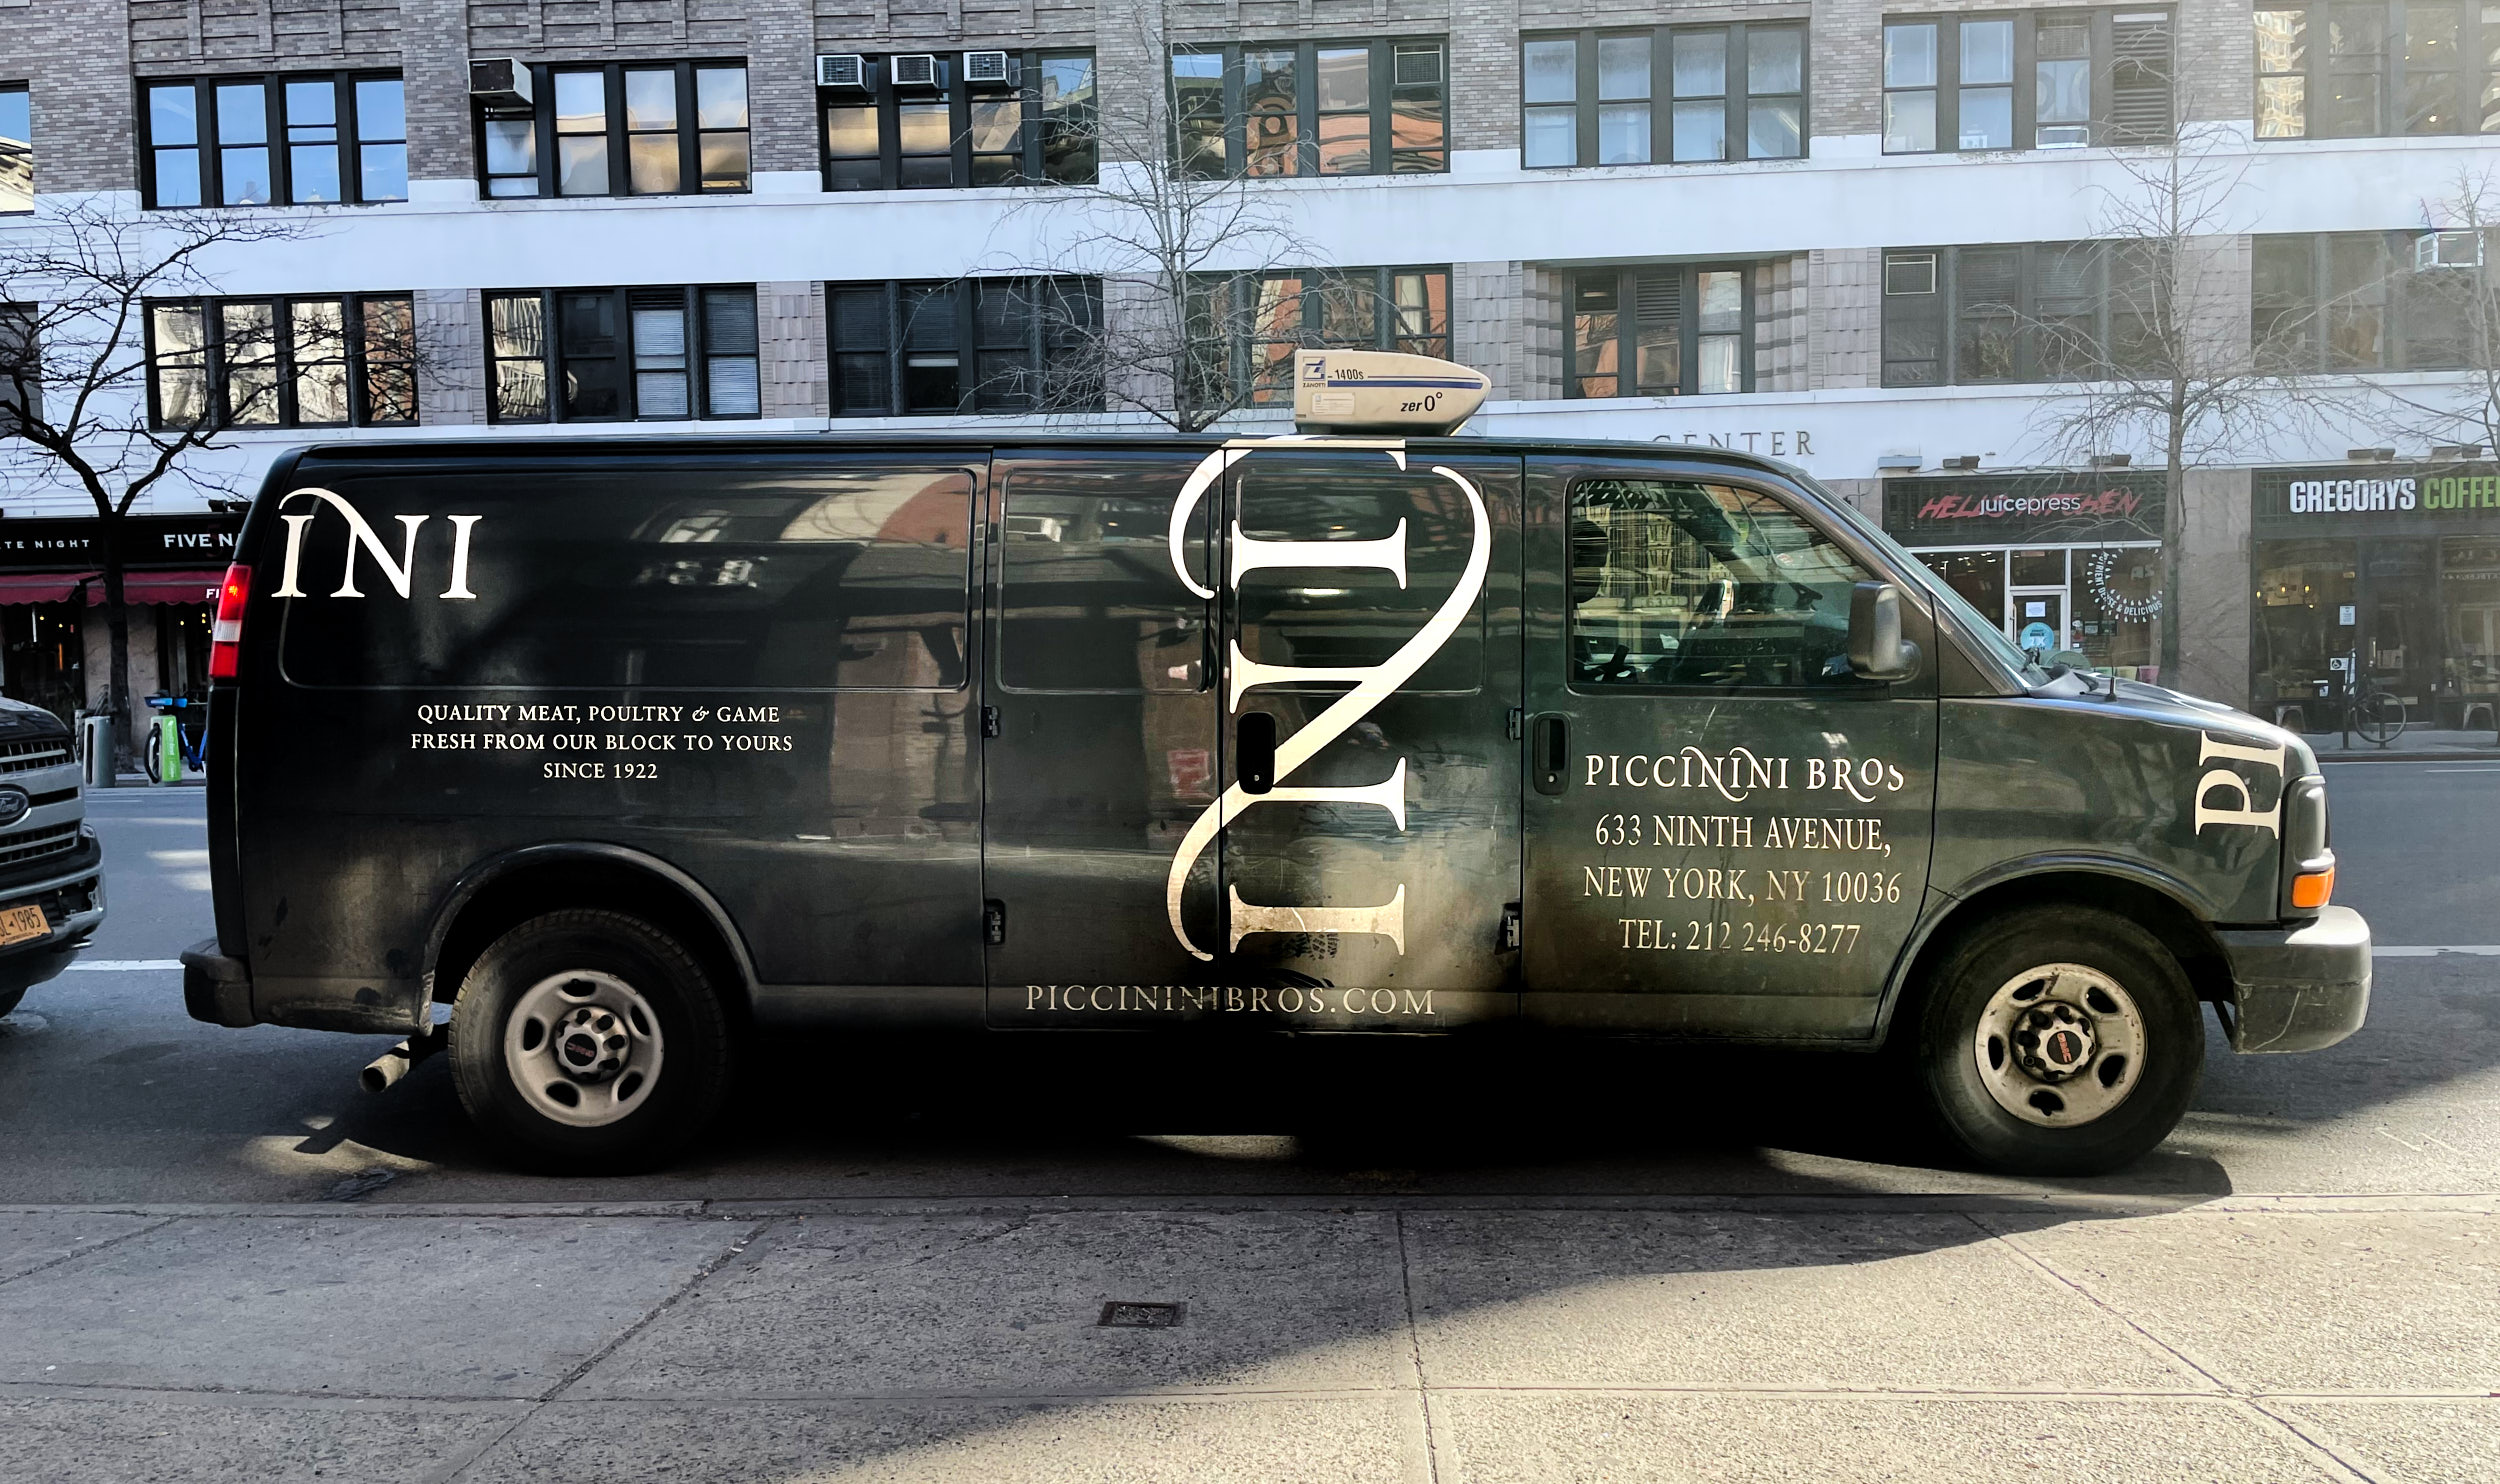 Piccinini Bros van delivers in the Hamptons every Thursday